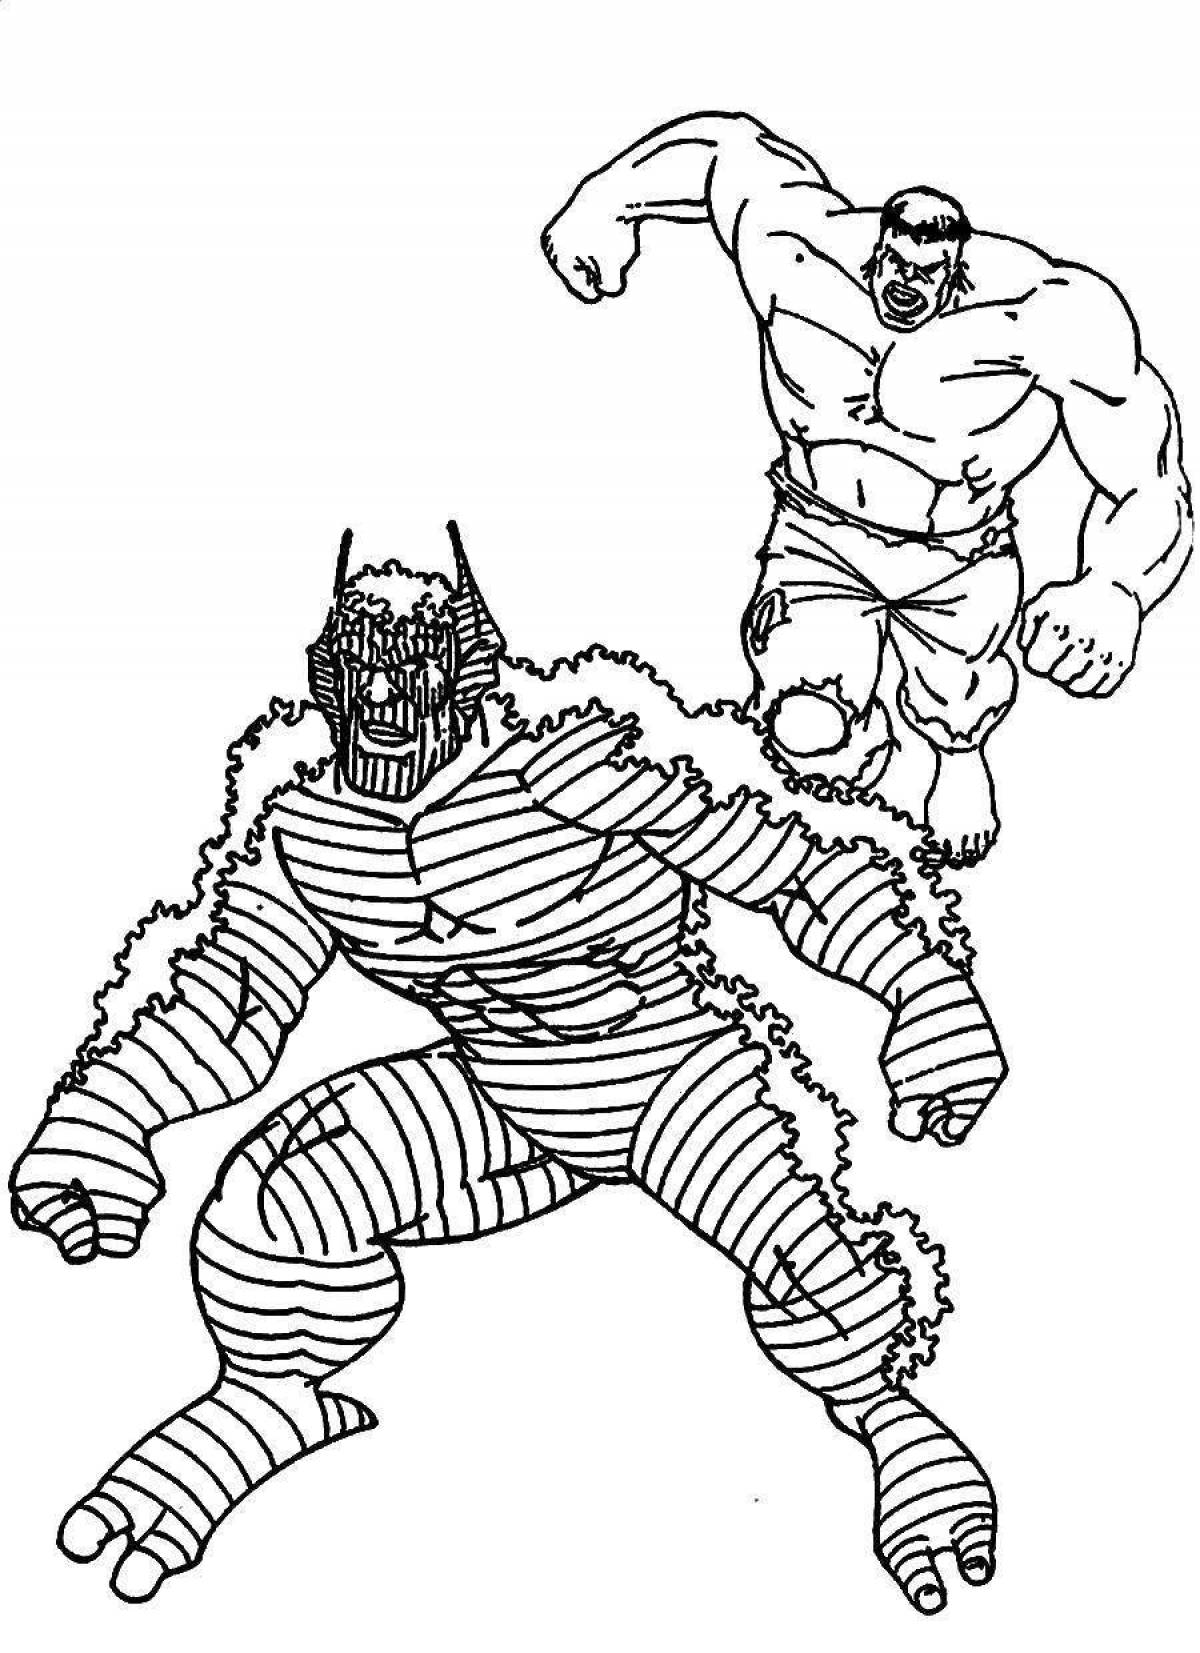 Supervillain ghost coloring pages